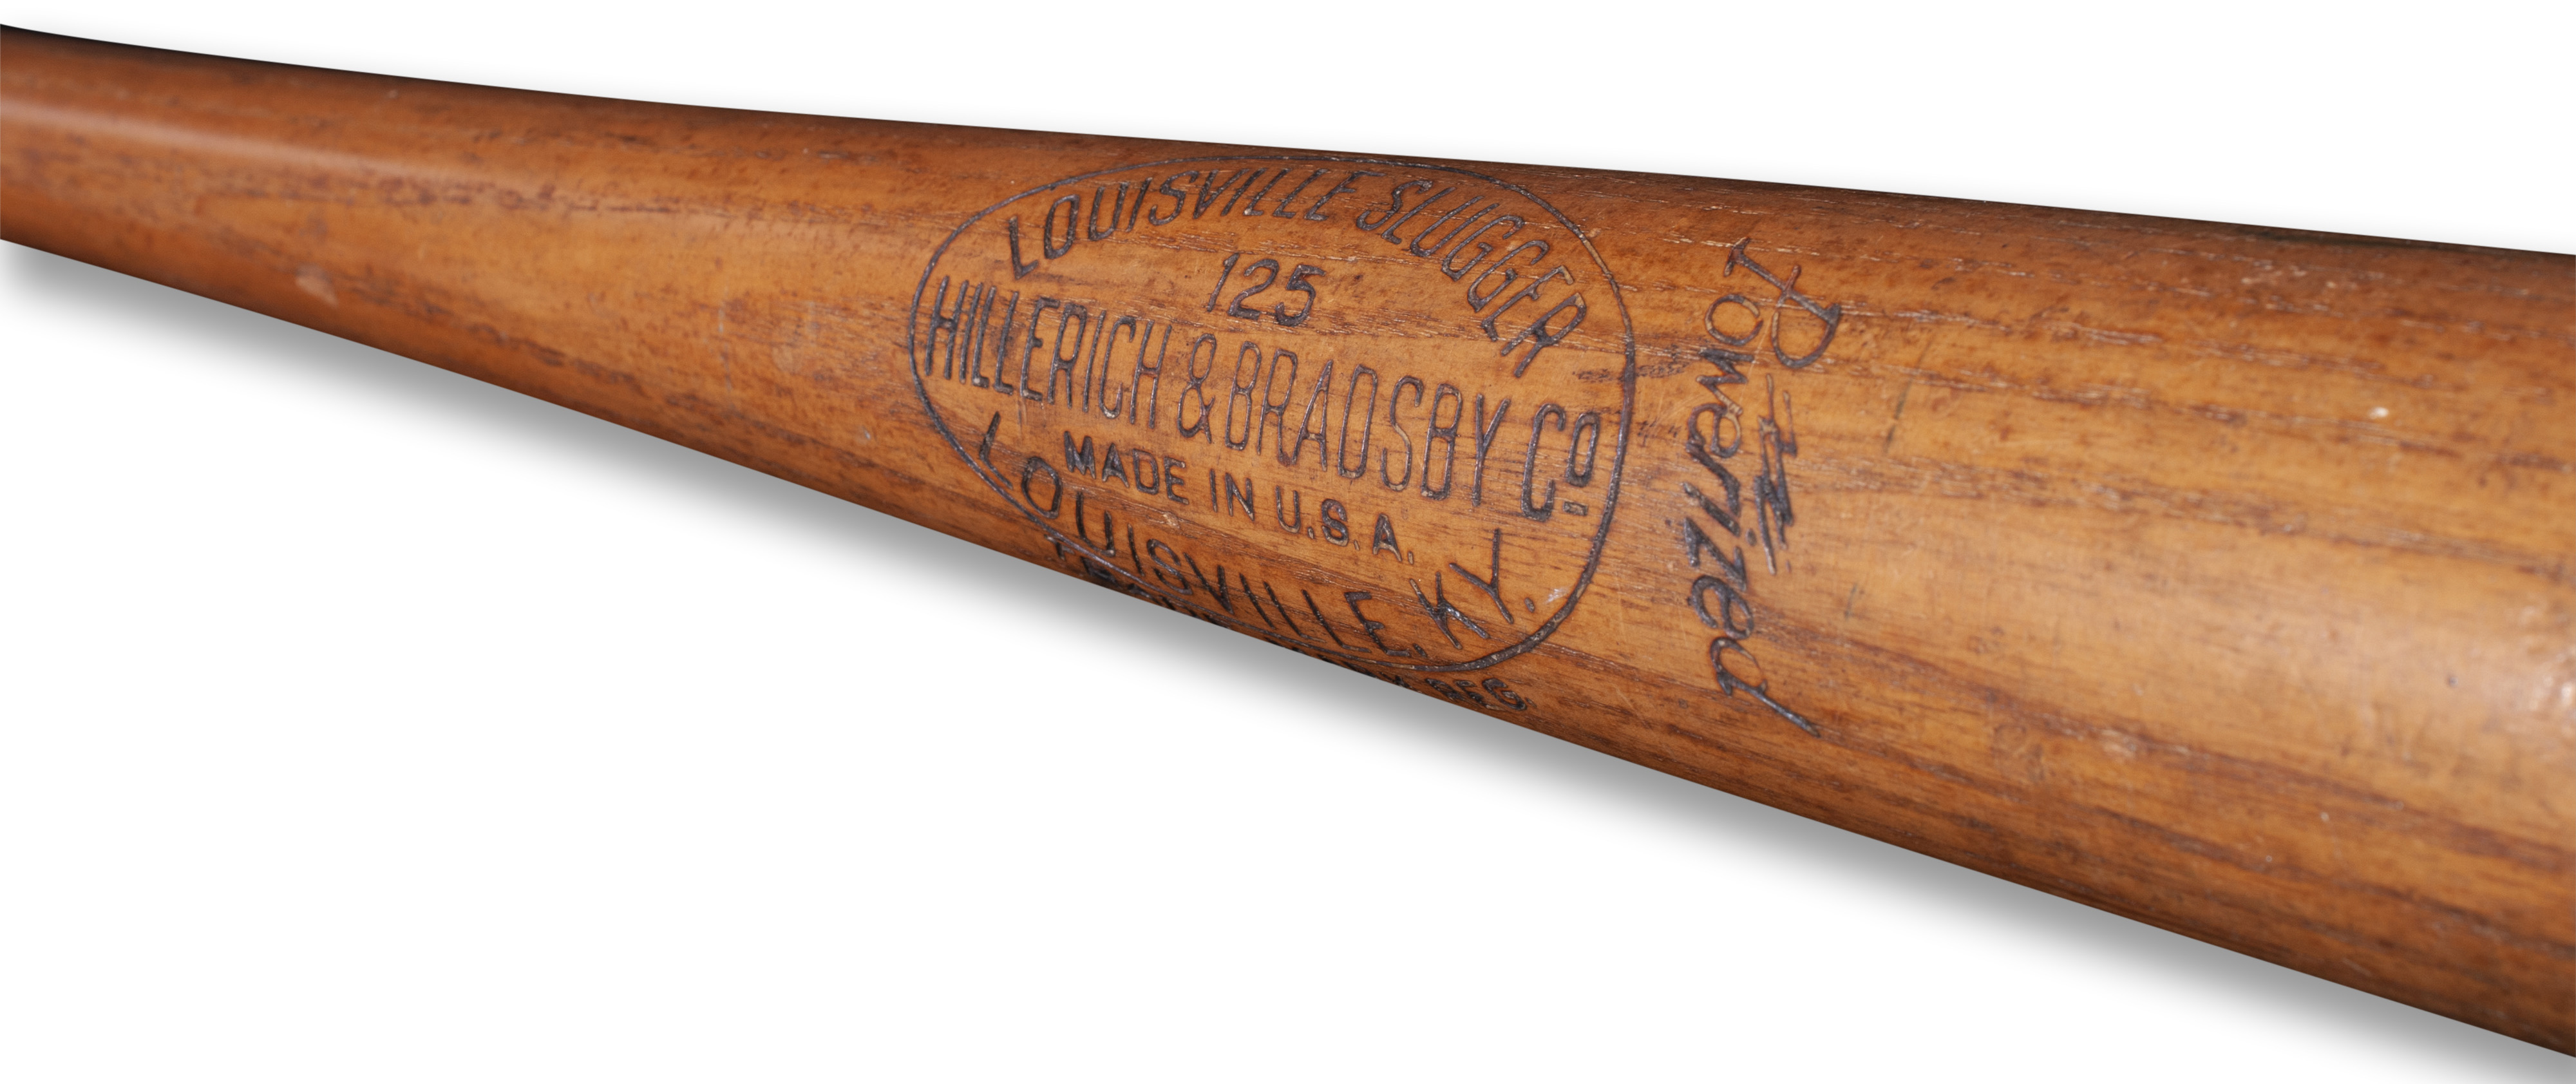 Bat Used by Lou Gehrig in 1938 Sells at Auction for $715,120 - The New York  Times